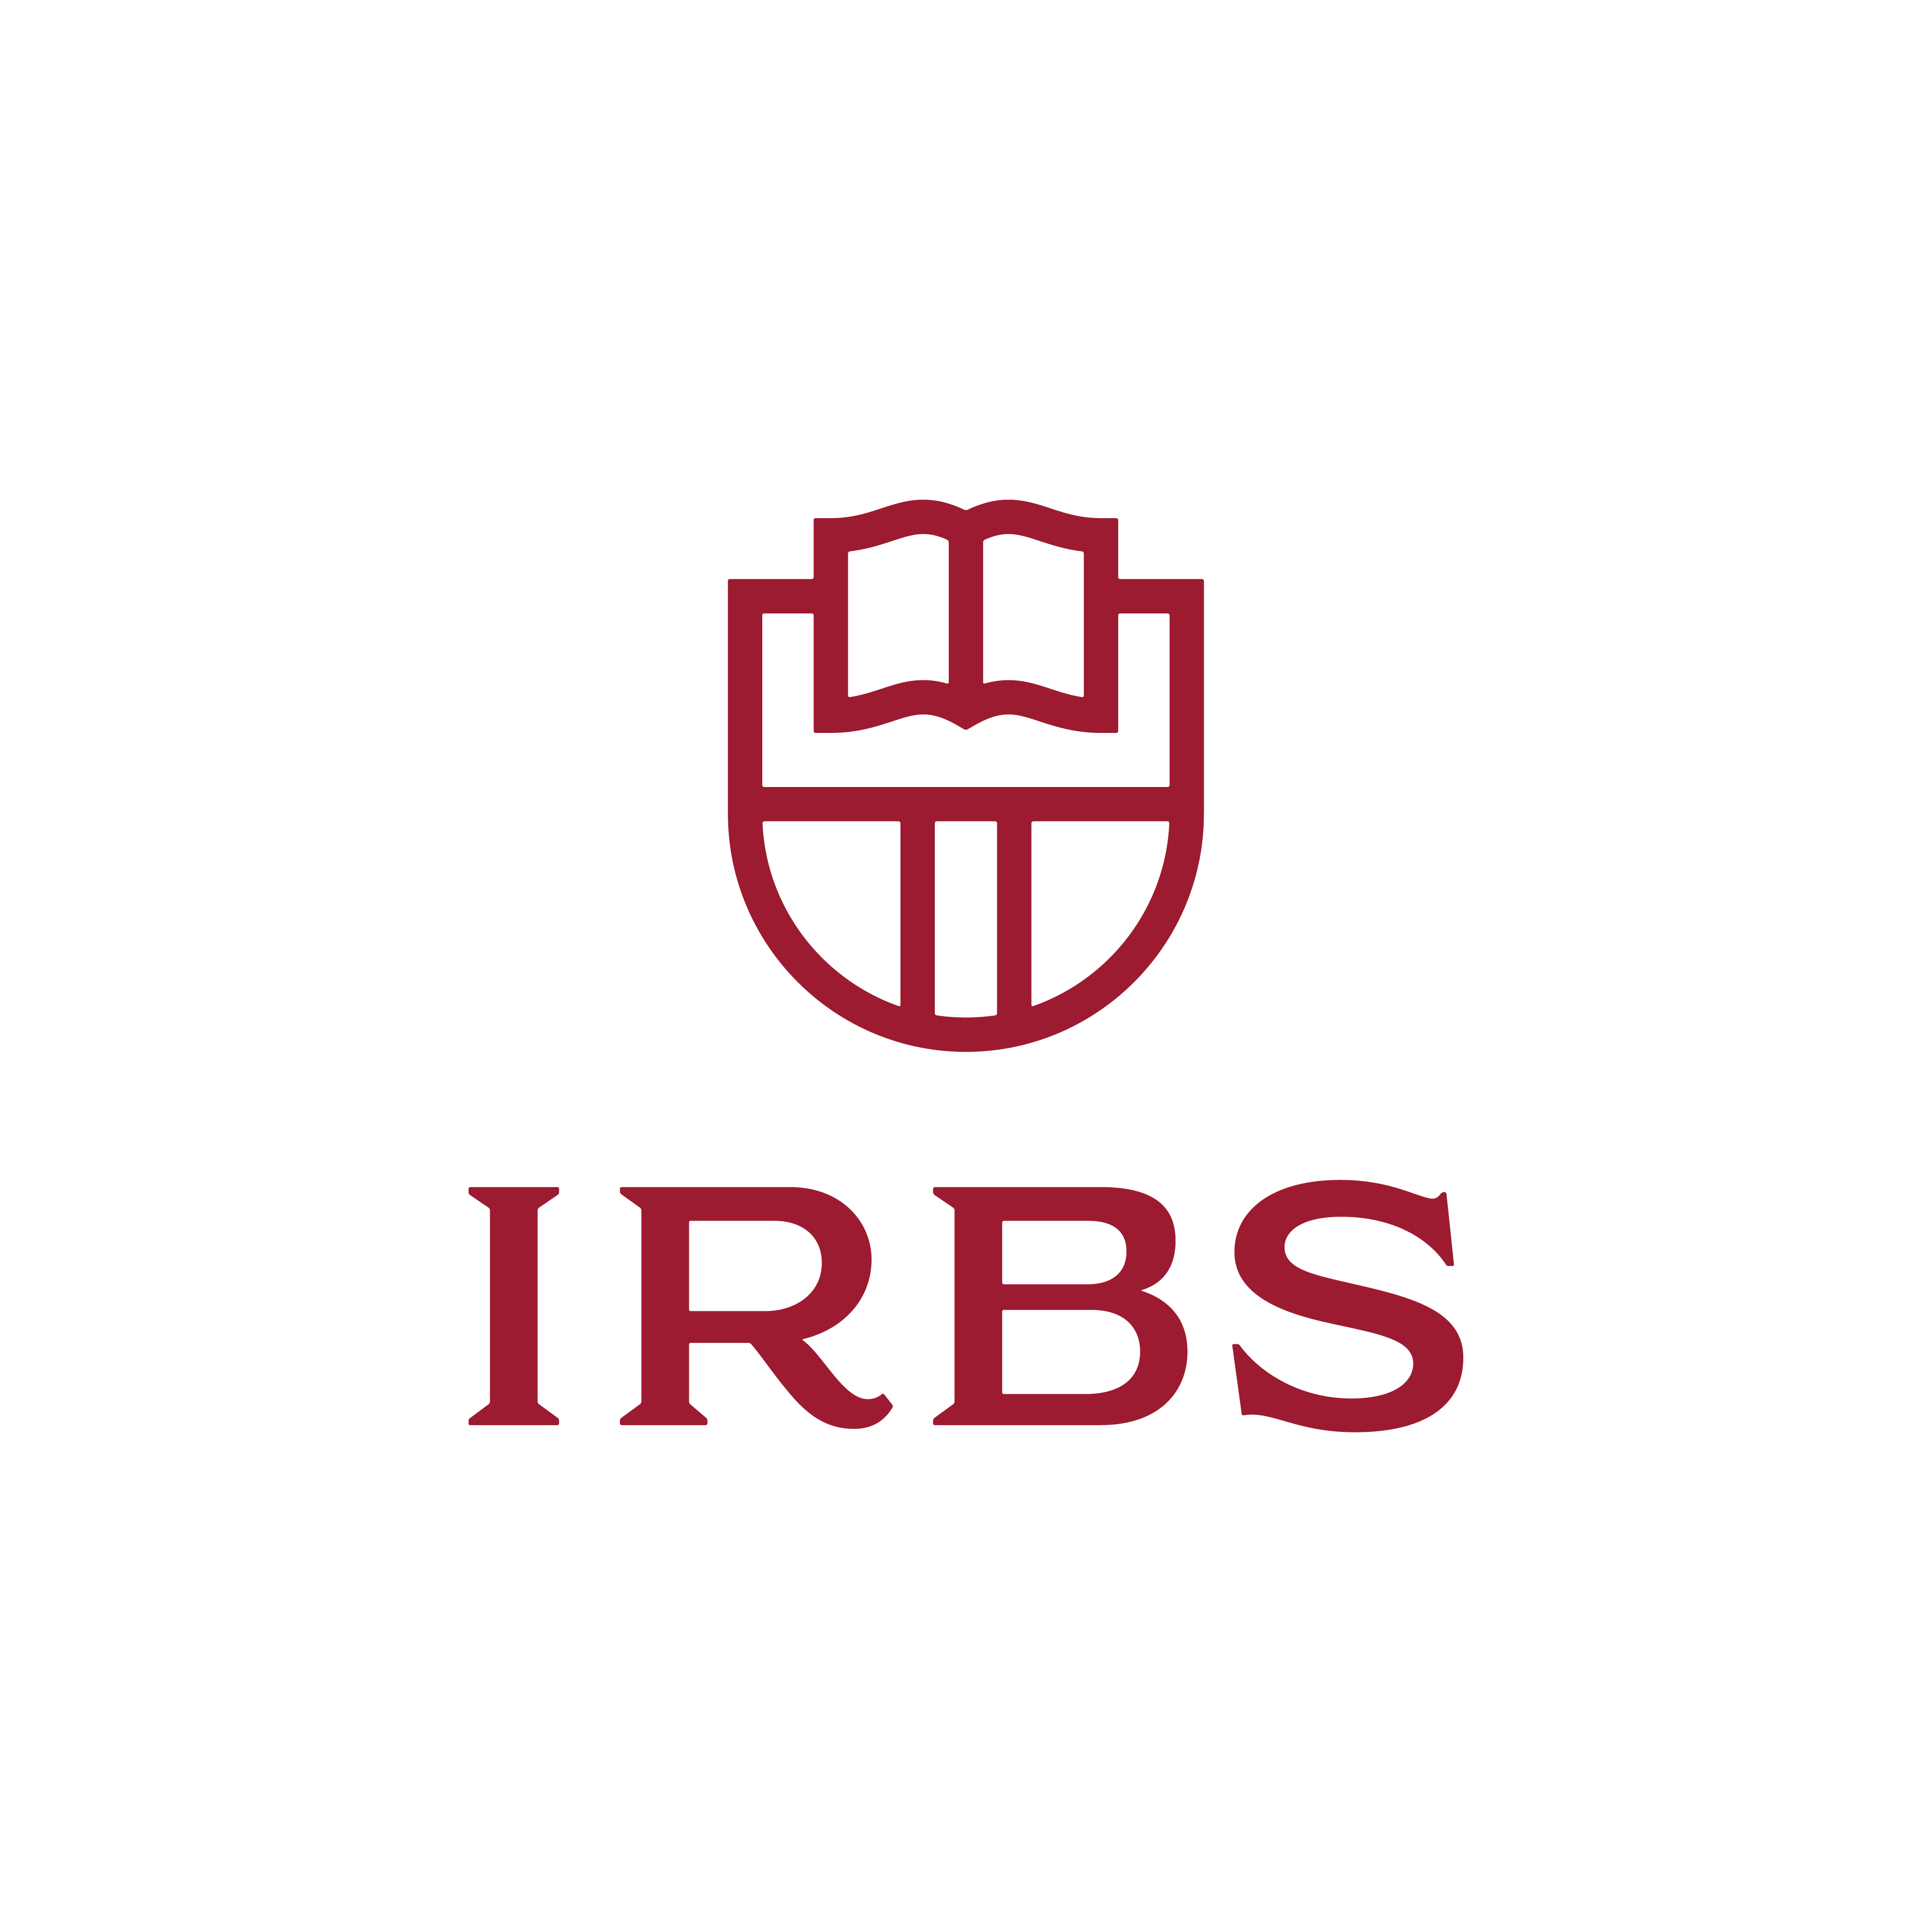 IRBS (Vertical Lock-Up) logo design by logo designer Decree Design Co for your inspiration and for the worlds largest logo competition